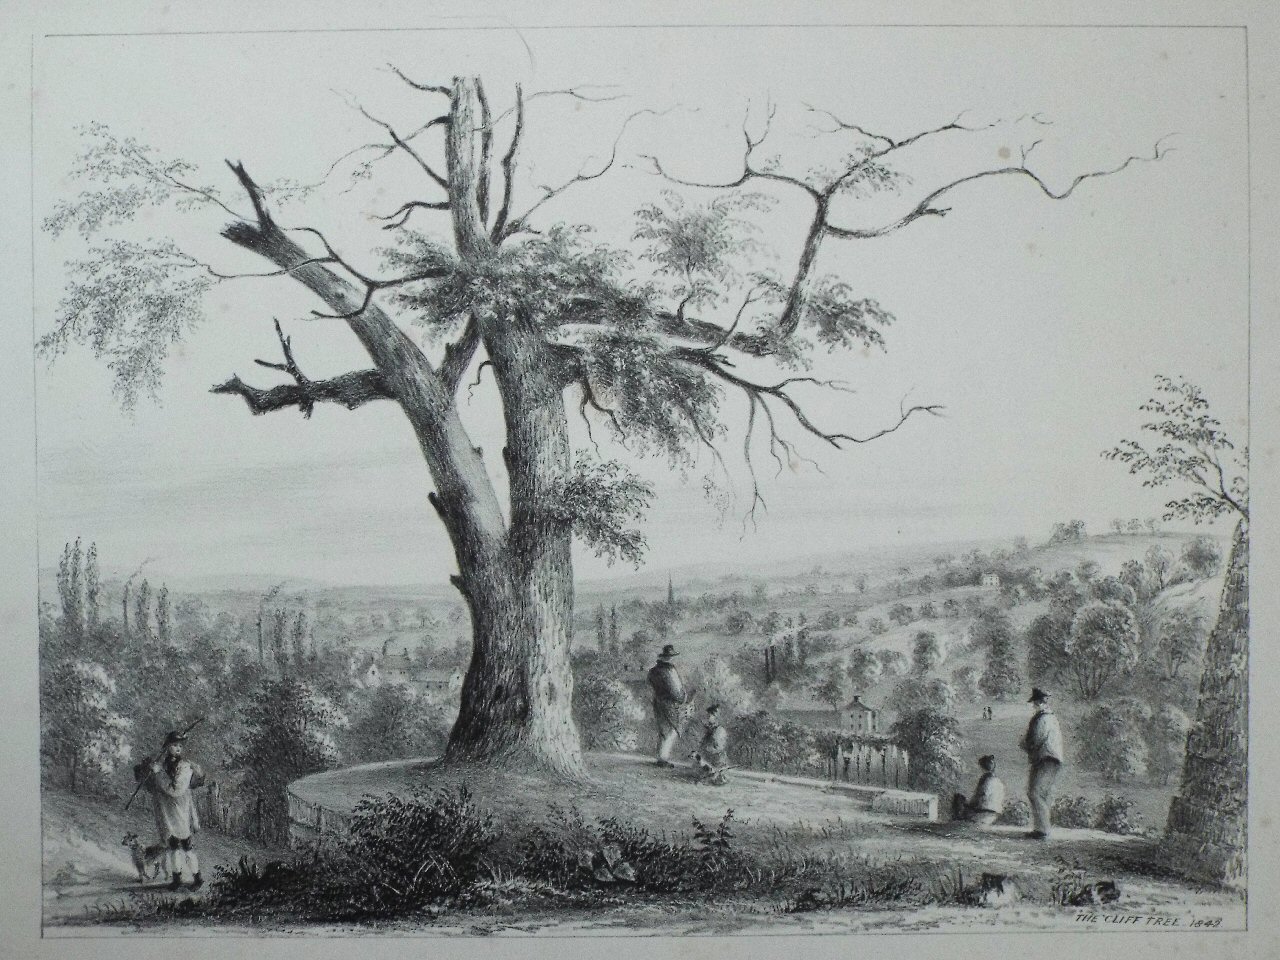 Lithograph - The cliff tree - Kilby